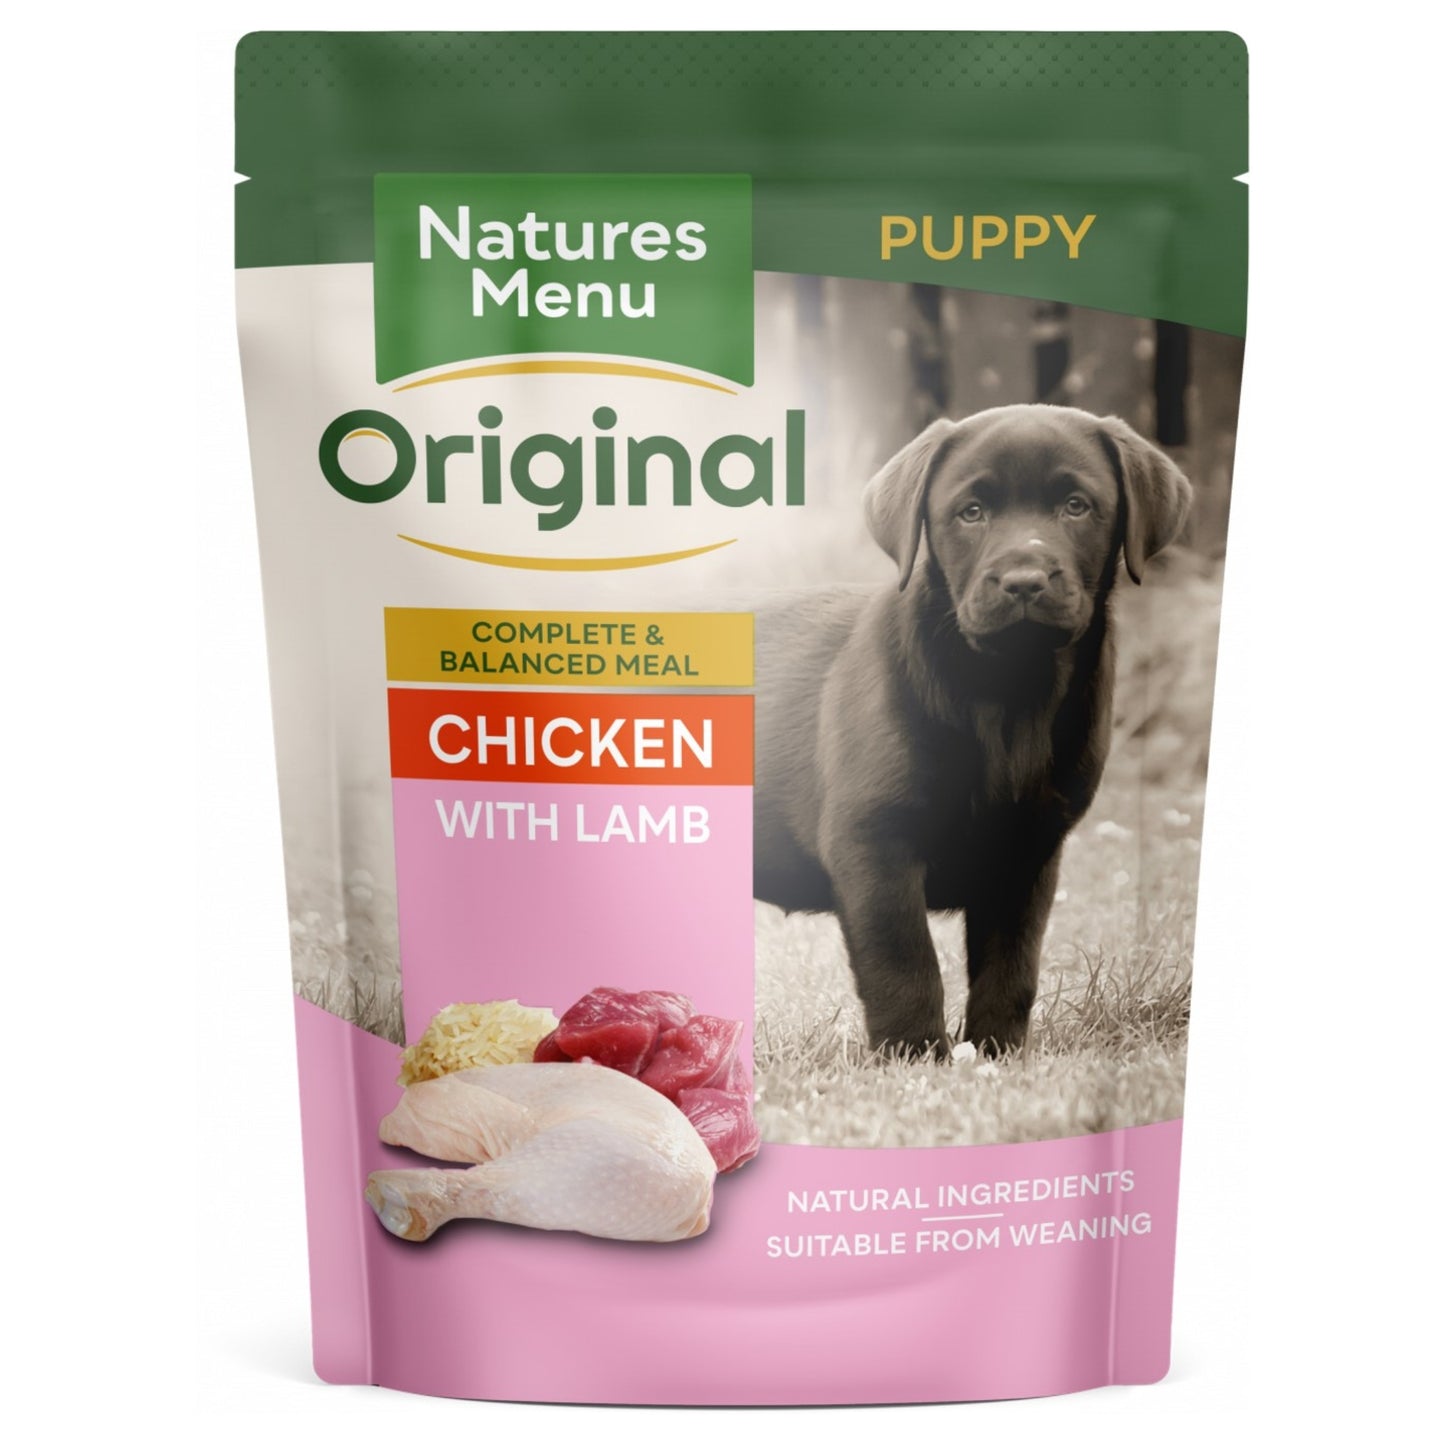 Natures Menu Puppy Chicken with Lamb Wet Dog Food Pouch 300g